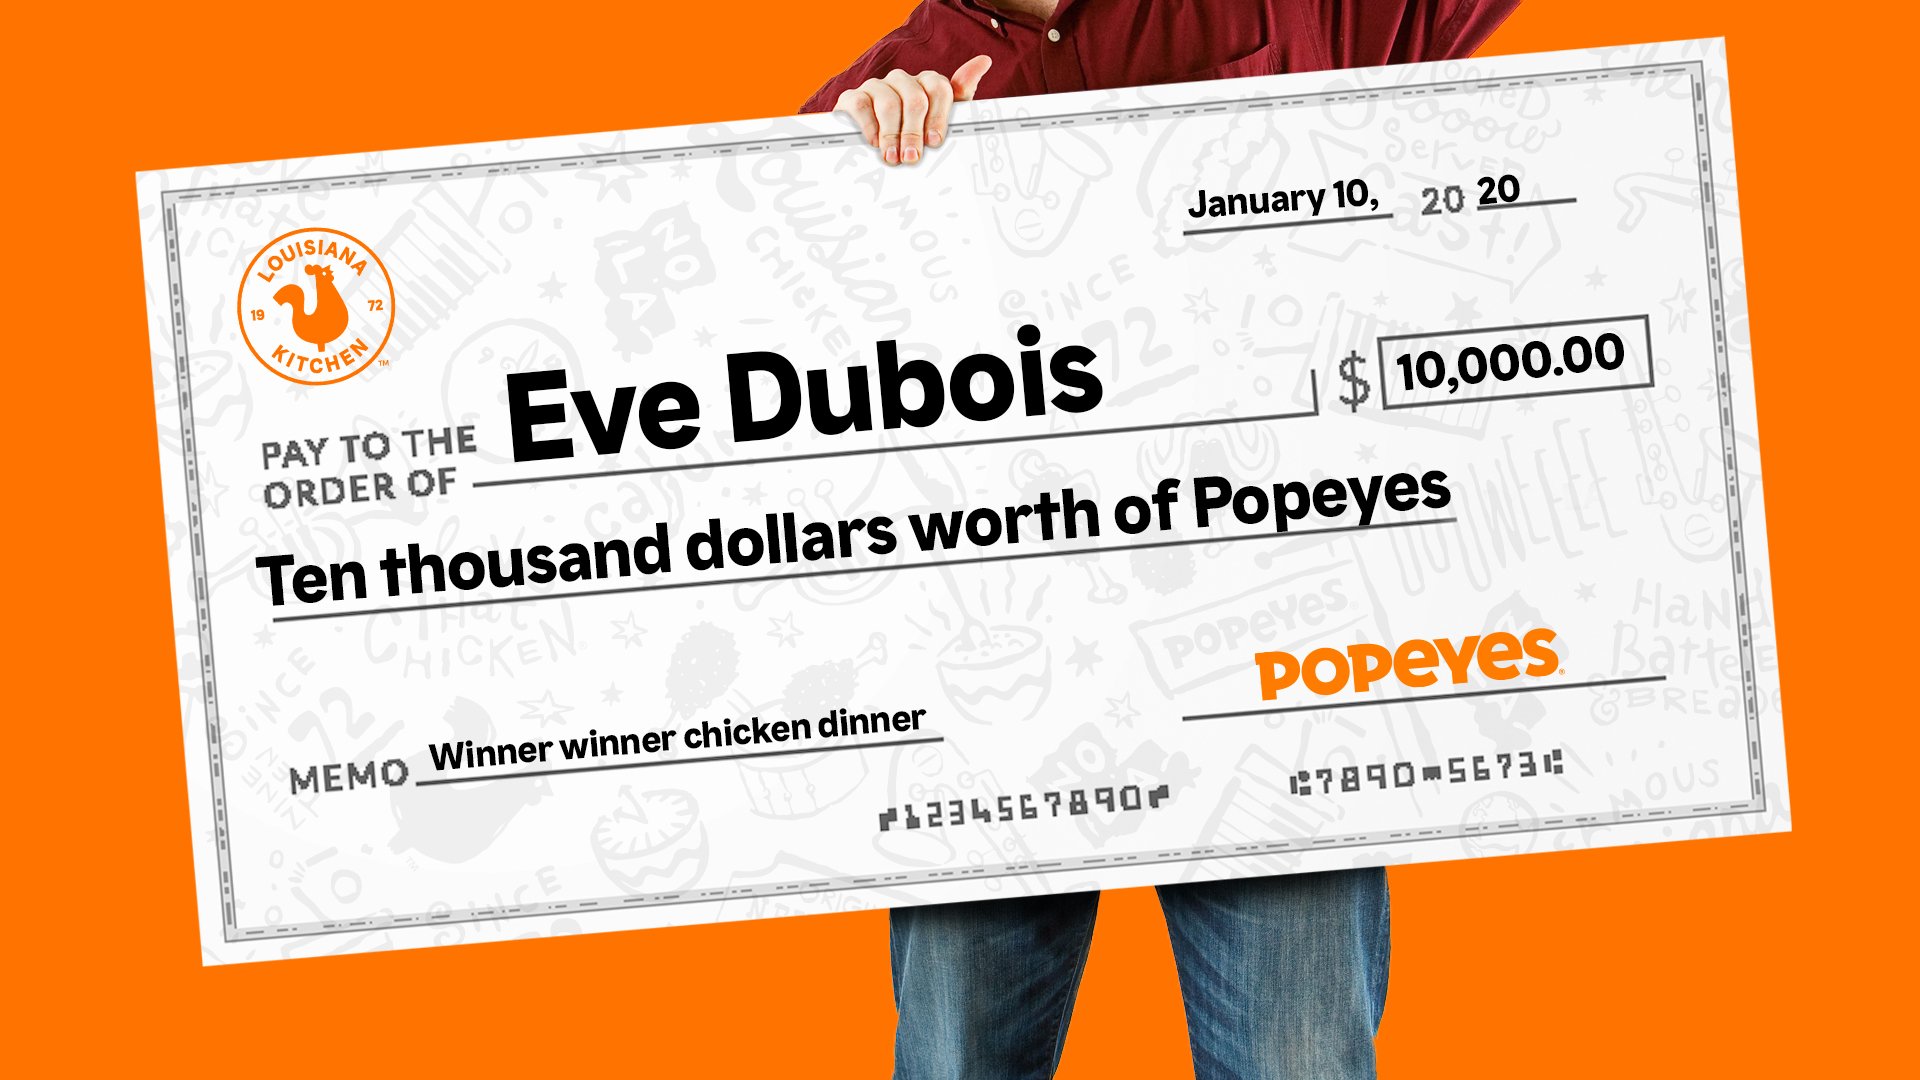 popeyes check for eve dubois 